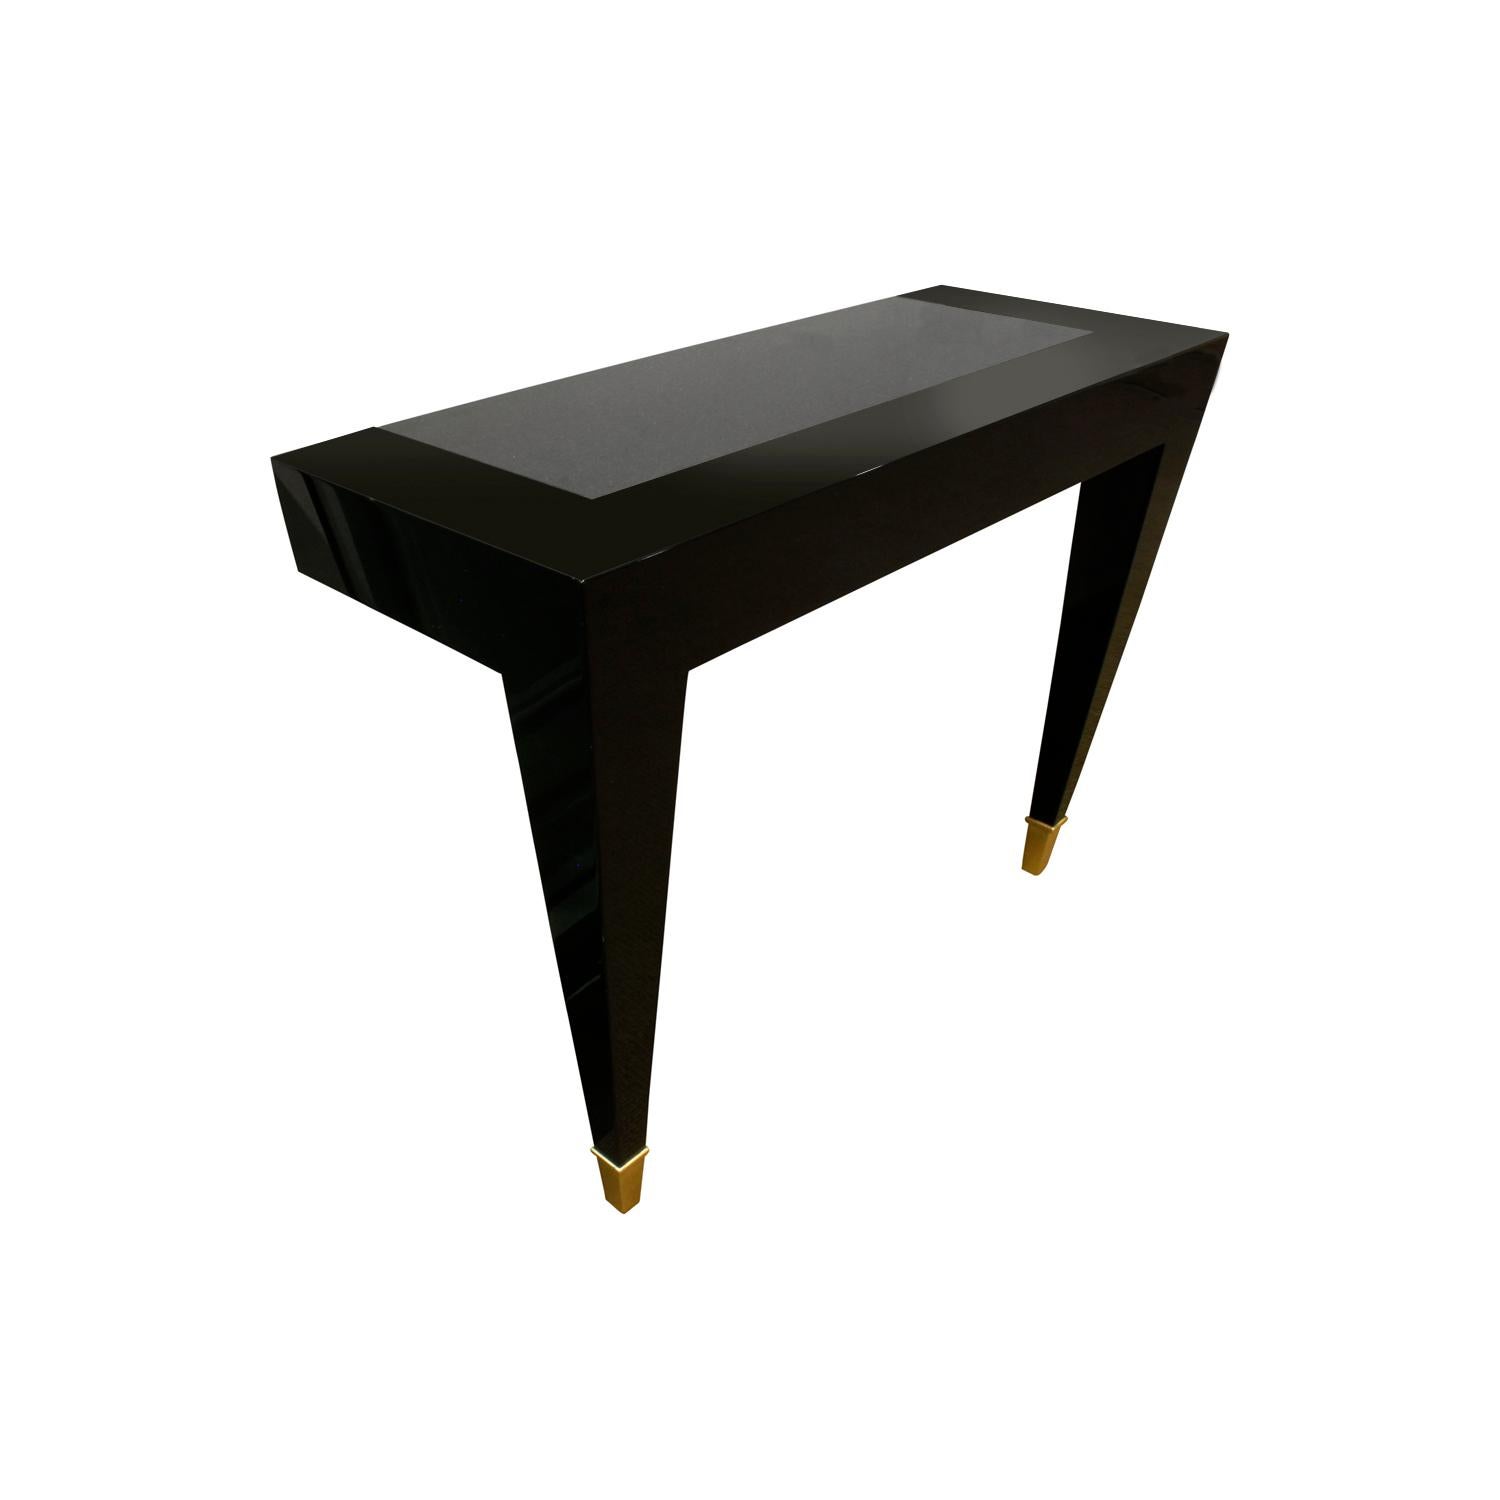 Mid-Century Modern Pace Black Lacquer Console Table with Inset Granite Top and Brass Sabots, 1980s For Sale